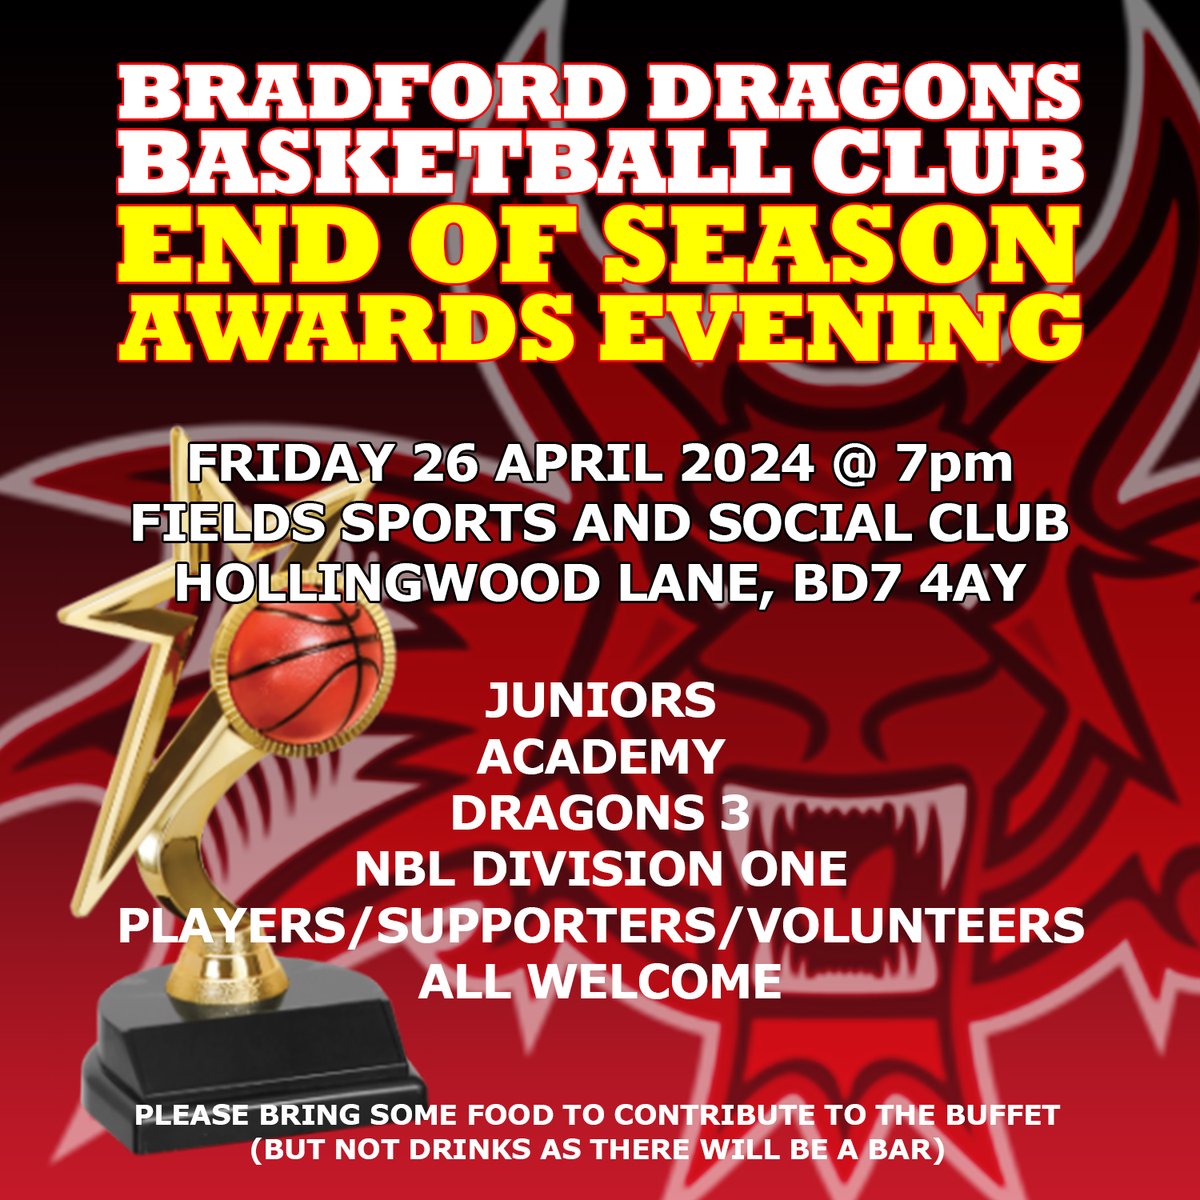 You are cordially invited to attend the Bradford Dragons End of Season Awards Evening - see image for details. 
#BradfordDragons #Basketball #OneClubOneFamily #AwardsNight